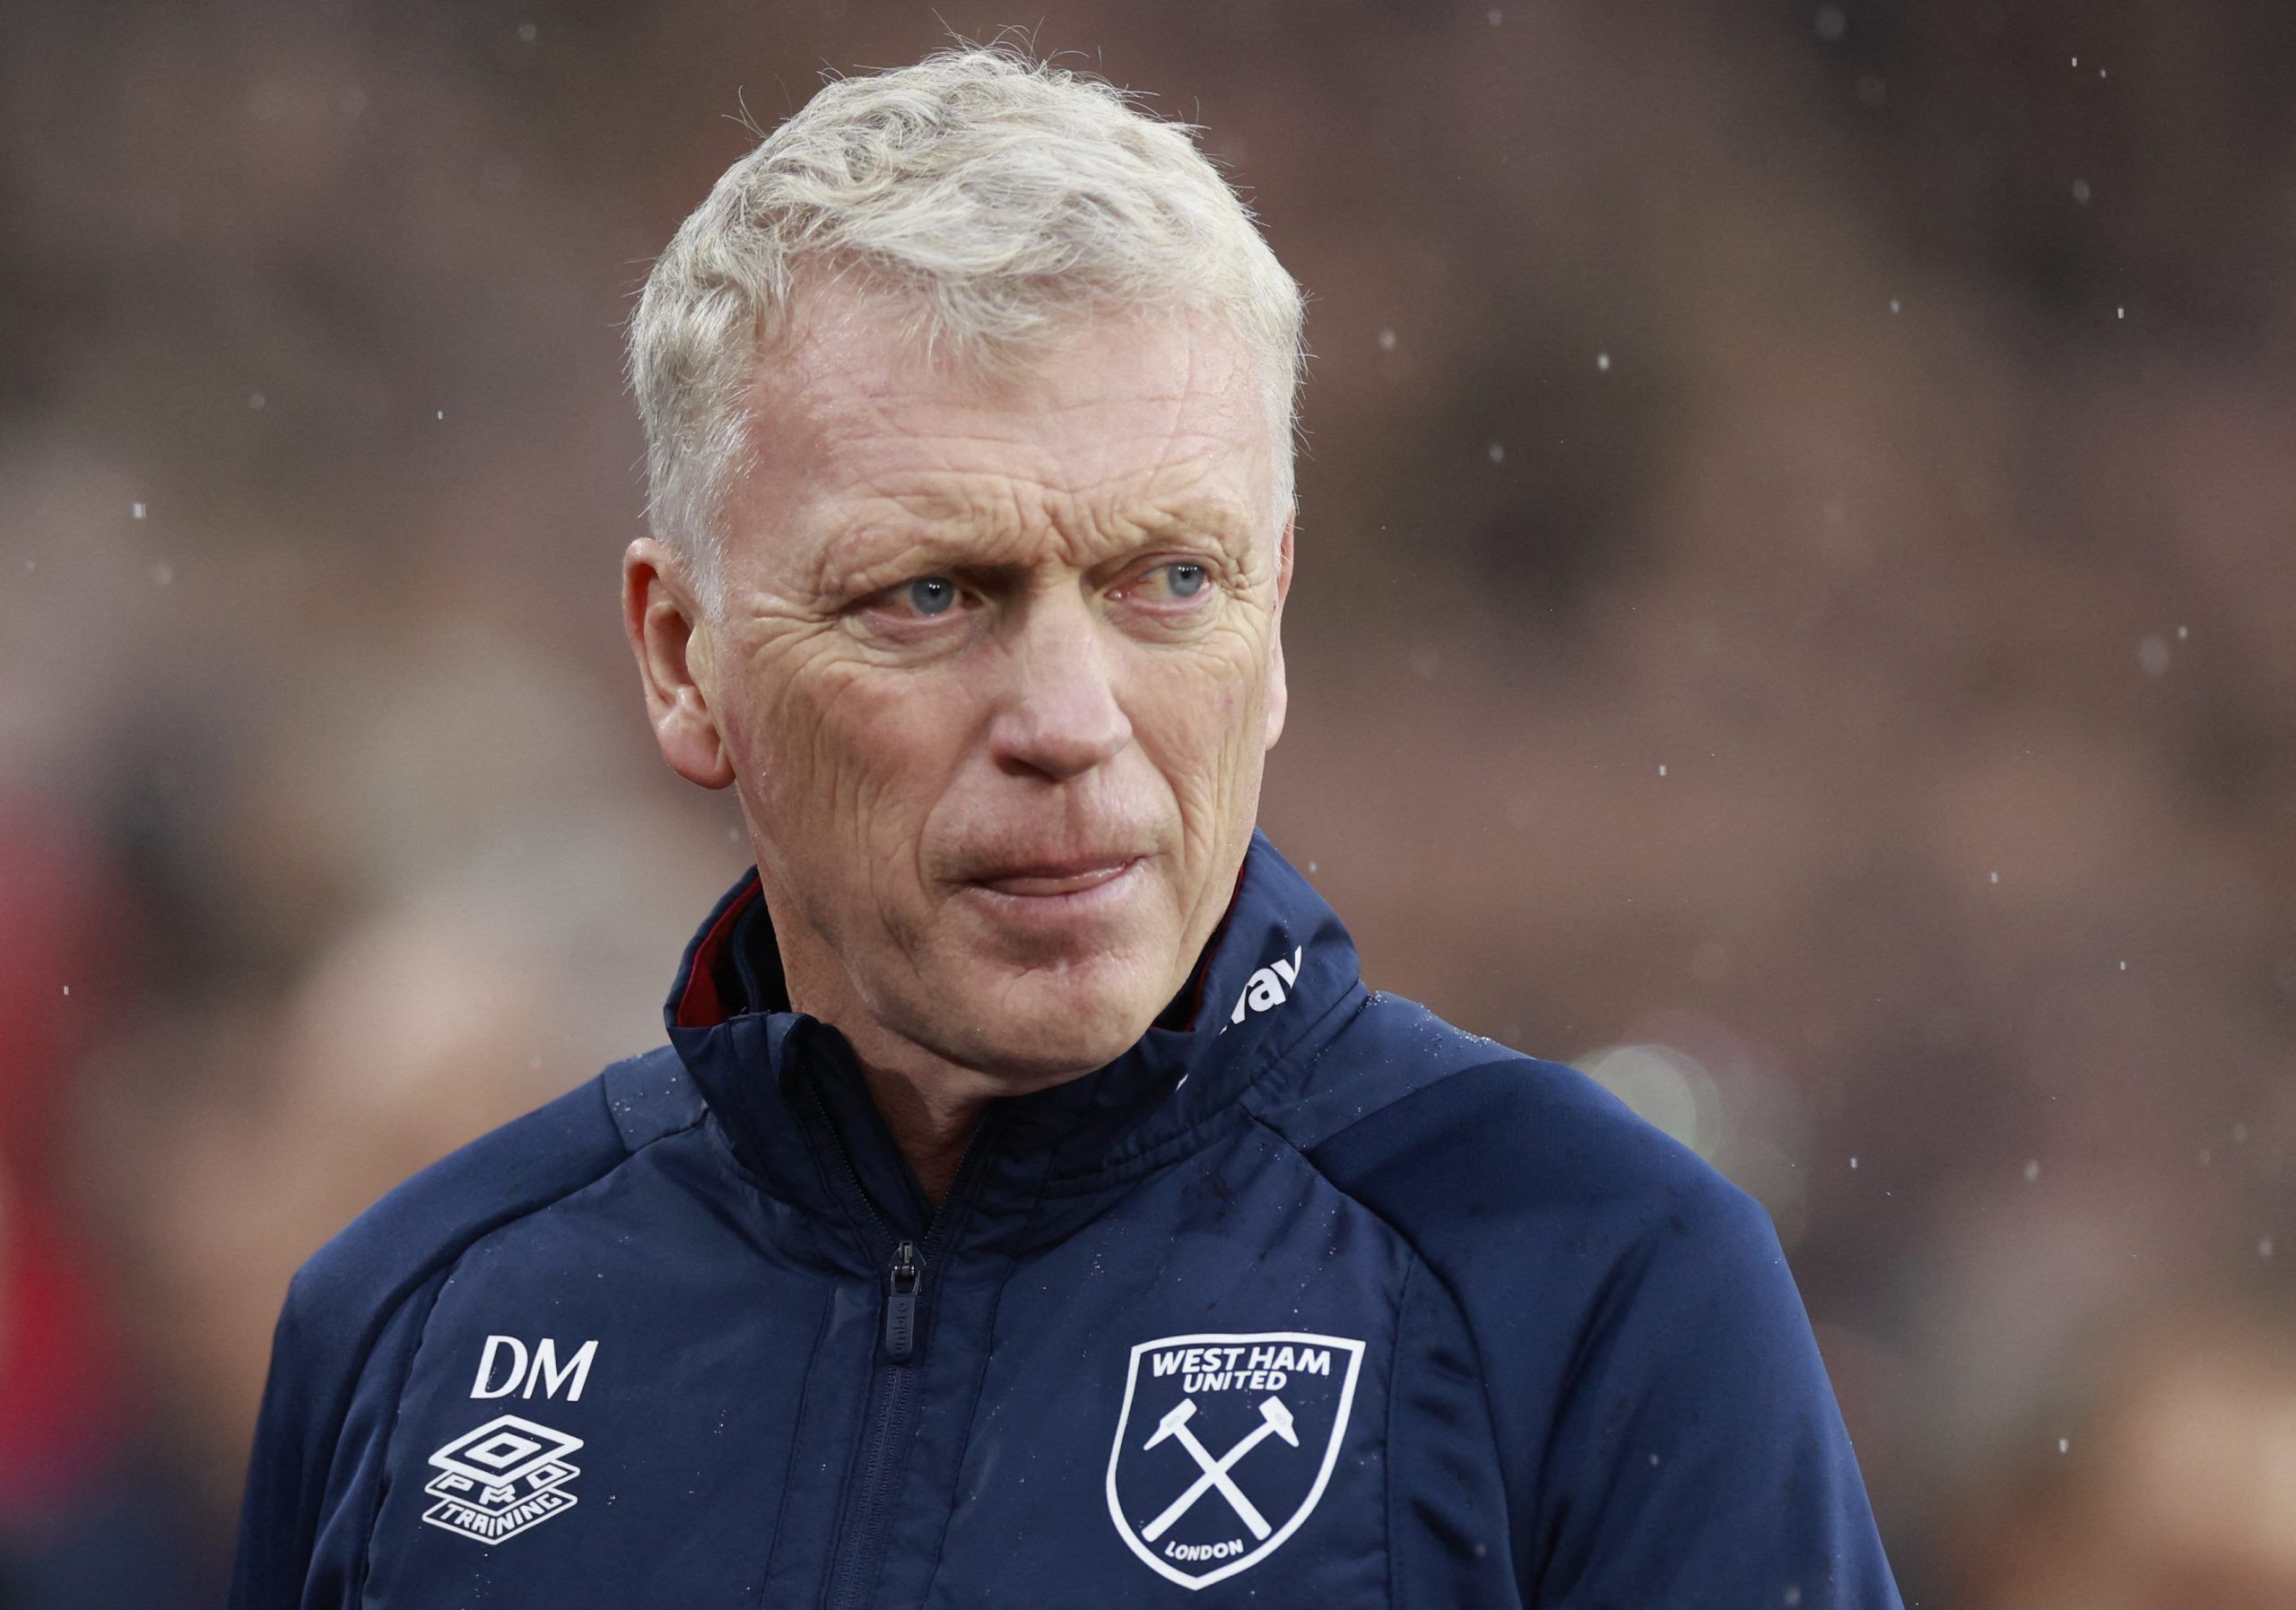 West Ham United: David Moyes’ job reportedly at risk -Premier League News